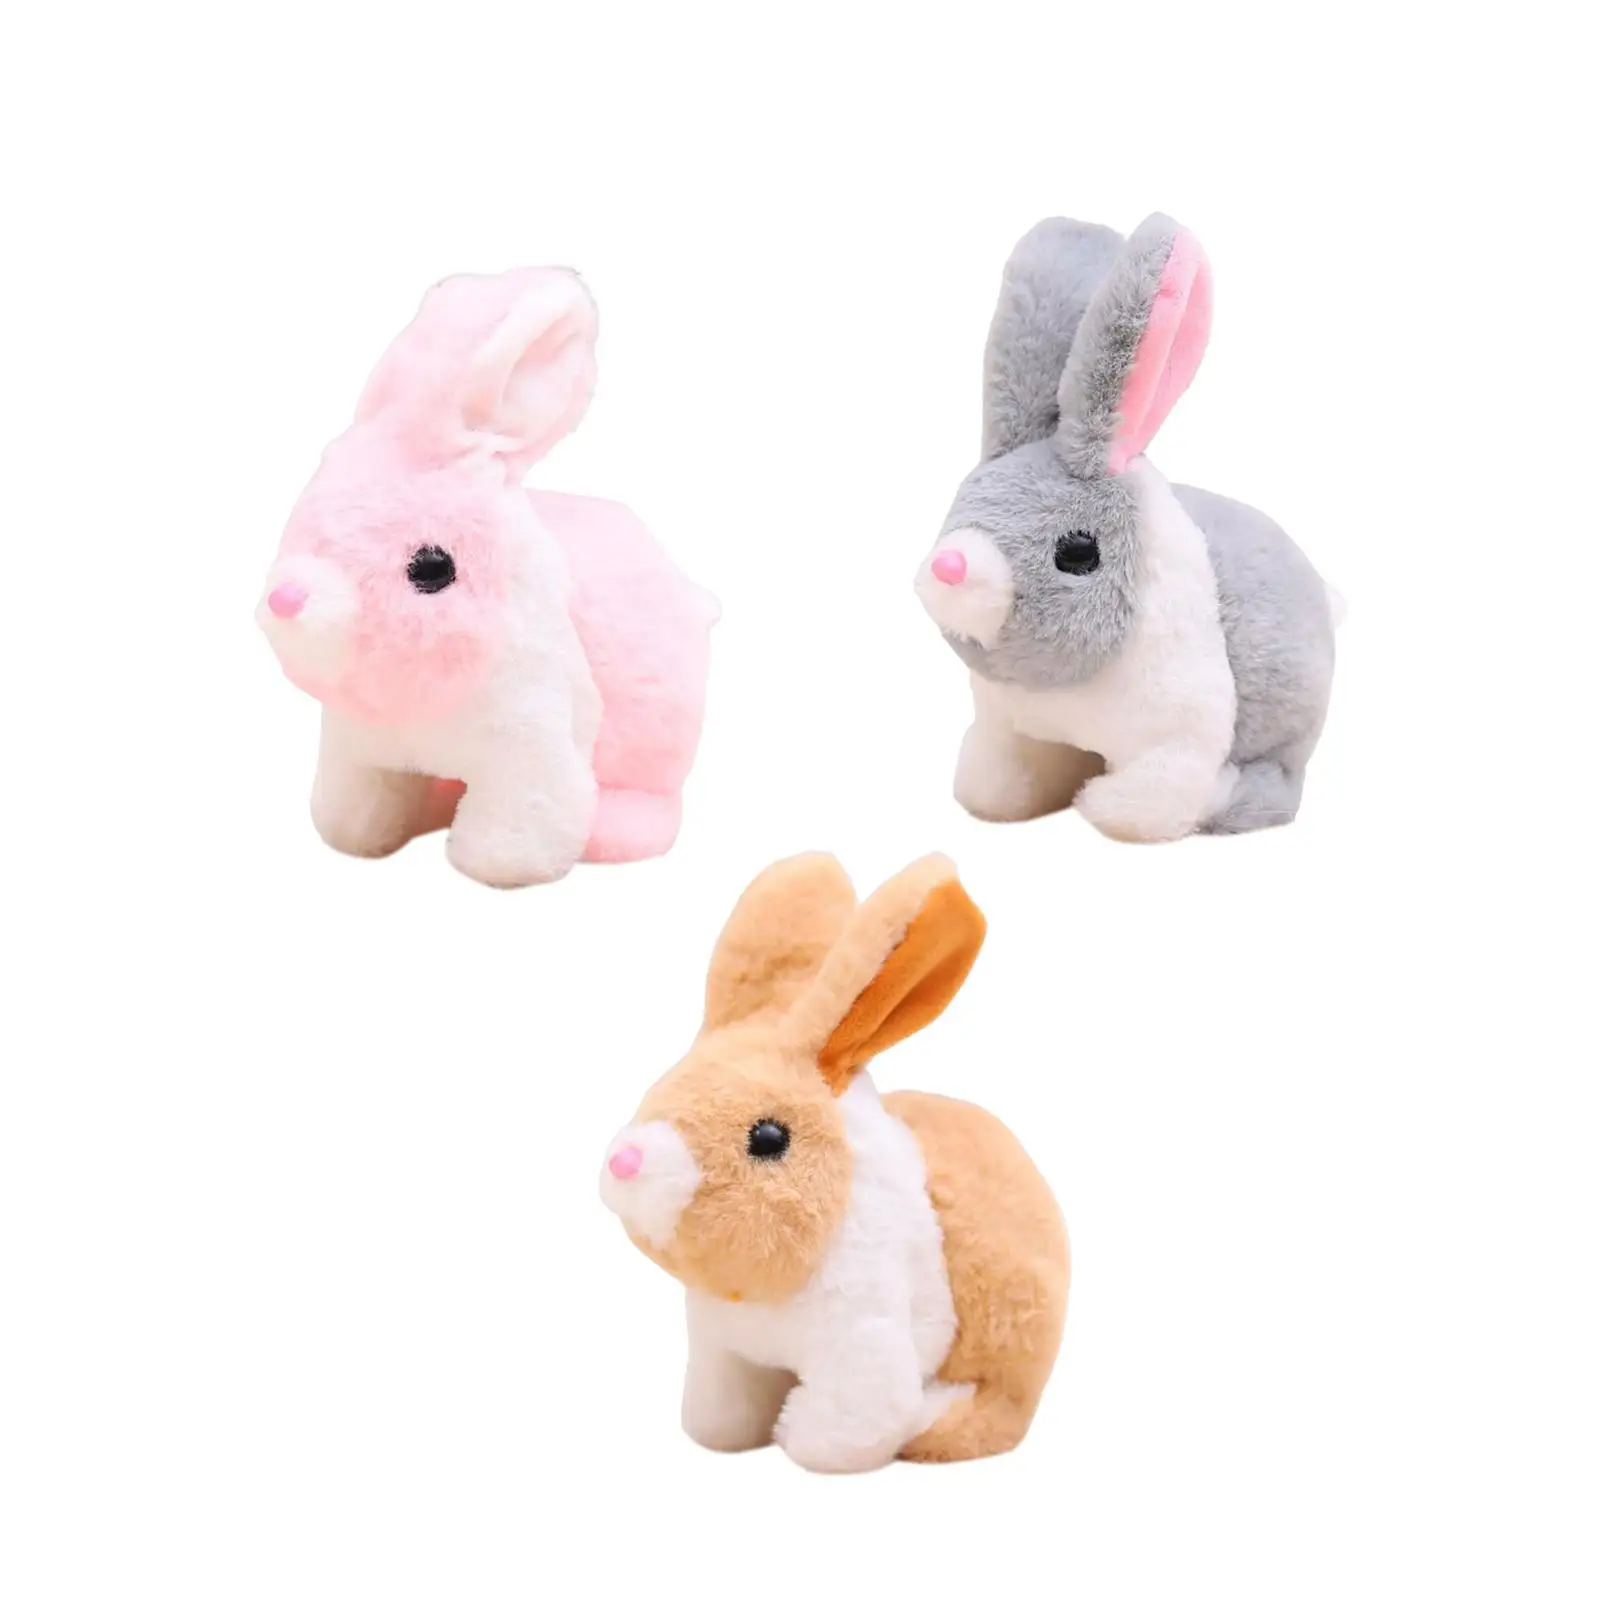 Electric Rabbit Toys Plush Toy Educational Stuffed Animal for Party Favor